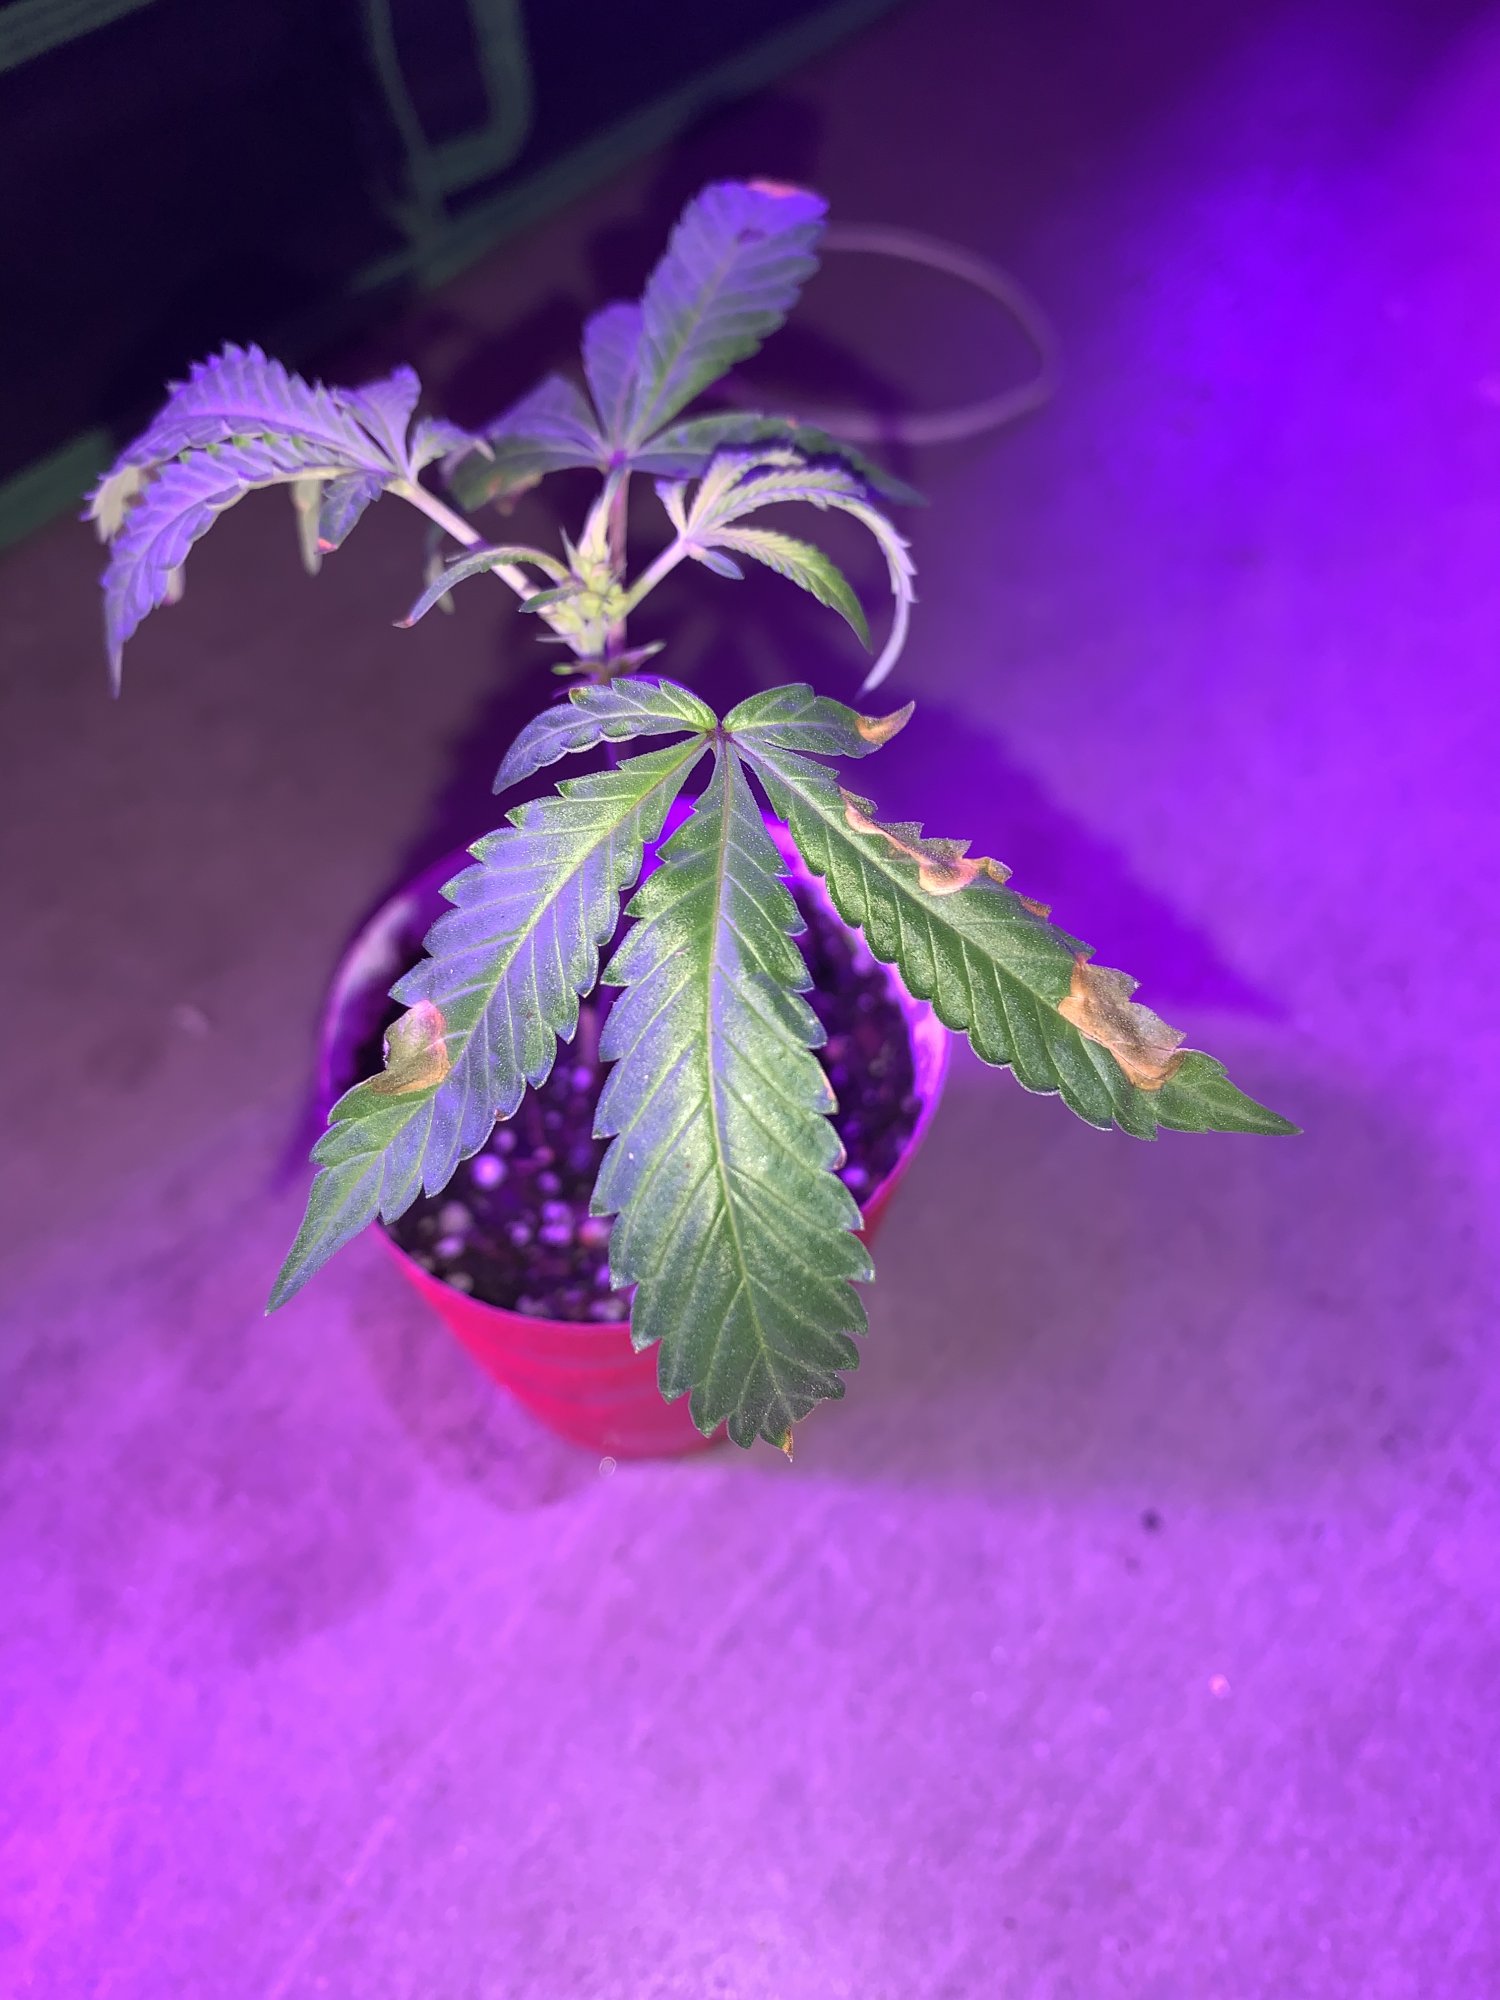 New to indoor growing and this is happening 3